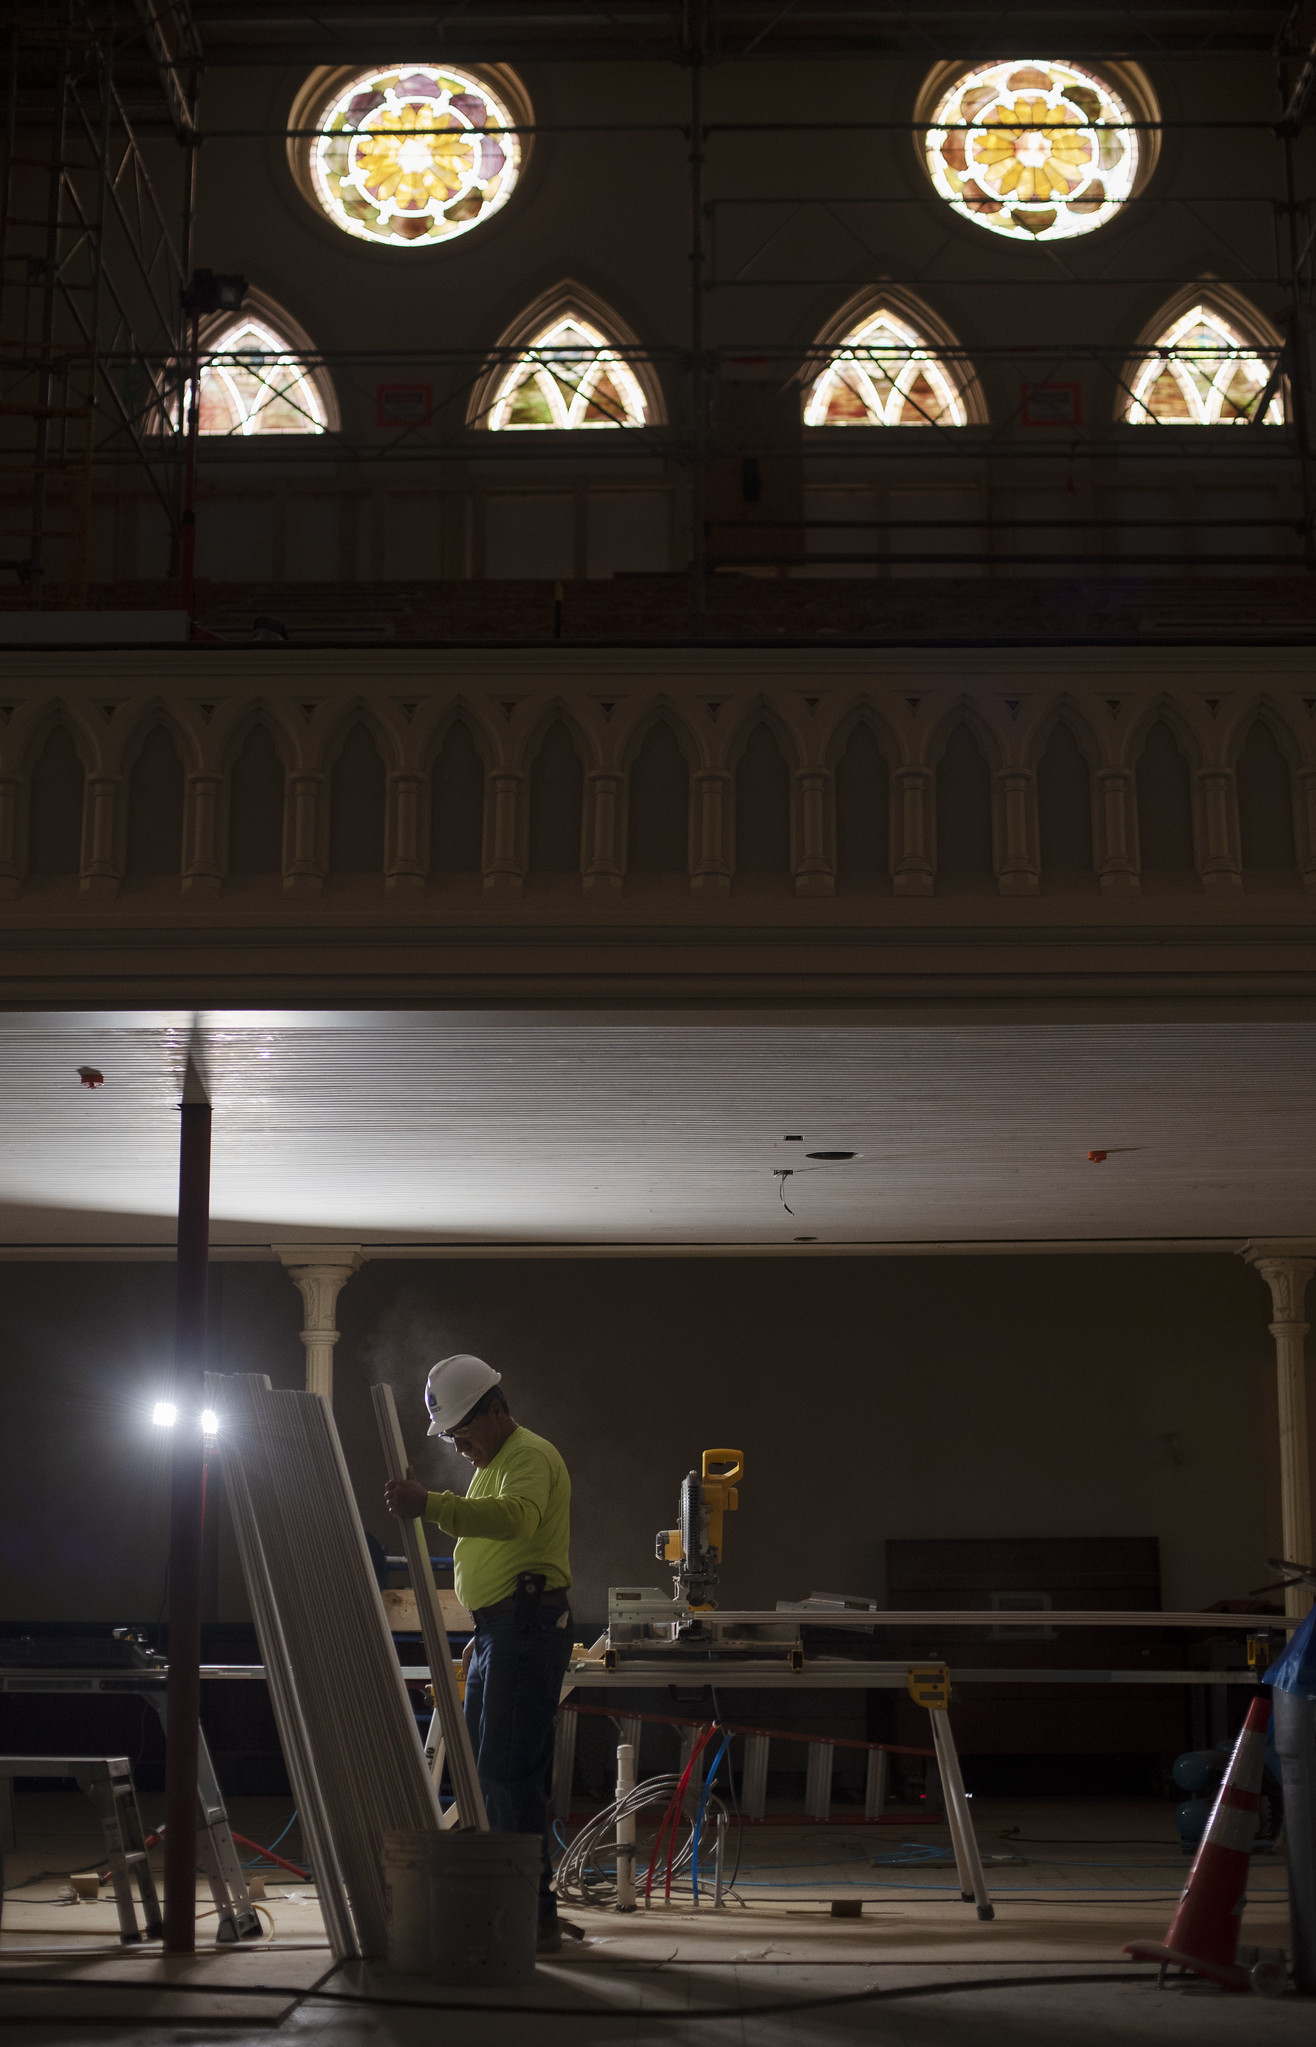 A construction worker is lit by worklight as sun streams through stained glass in the balcony of the great hall during construction at UPH Monday, Novermber 11, 2019. Photo credit: Kate Penn - Proctors